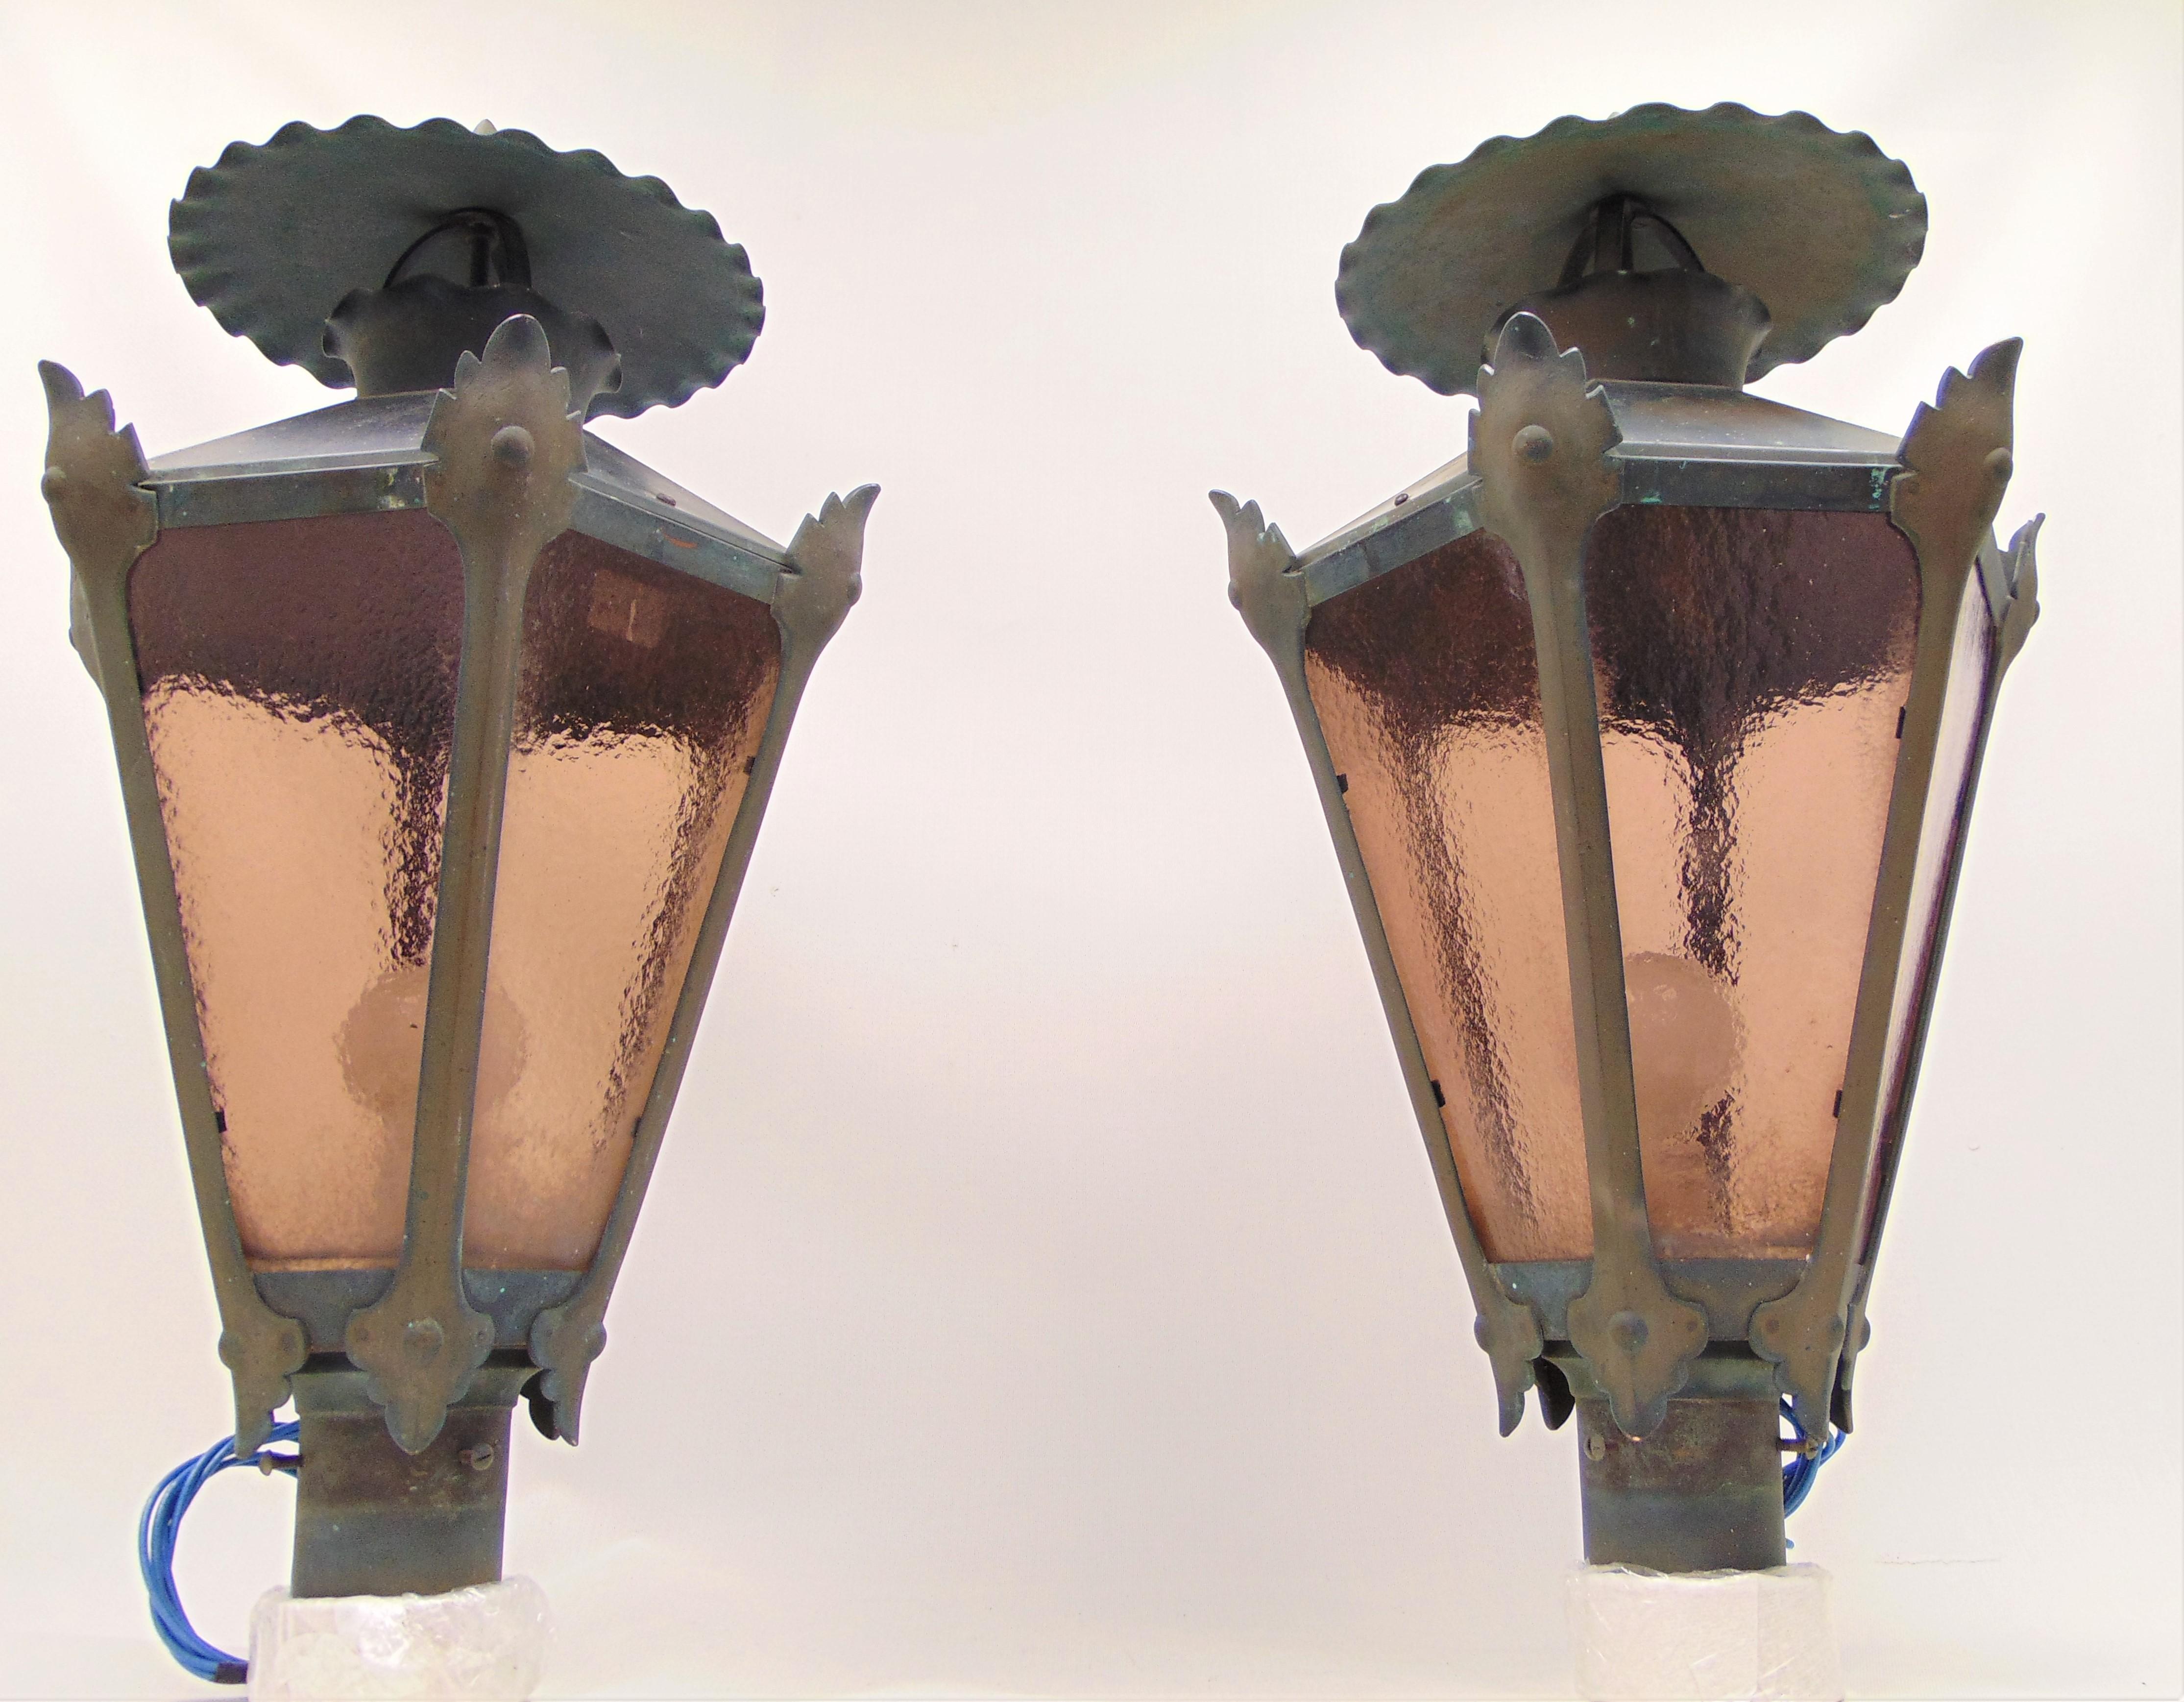 Vintage copper French style outdoor lanterns. They have just been re-wired. They measure: 29” H x 18” W x 18” D. The base is nearly 4”.  Listed for sale individually.  The pair is available.  